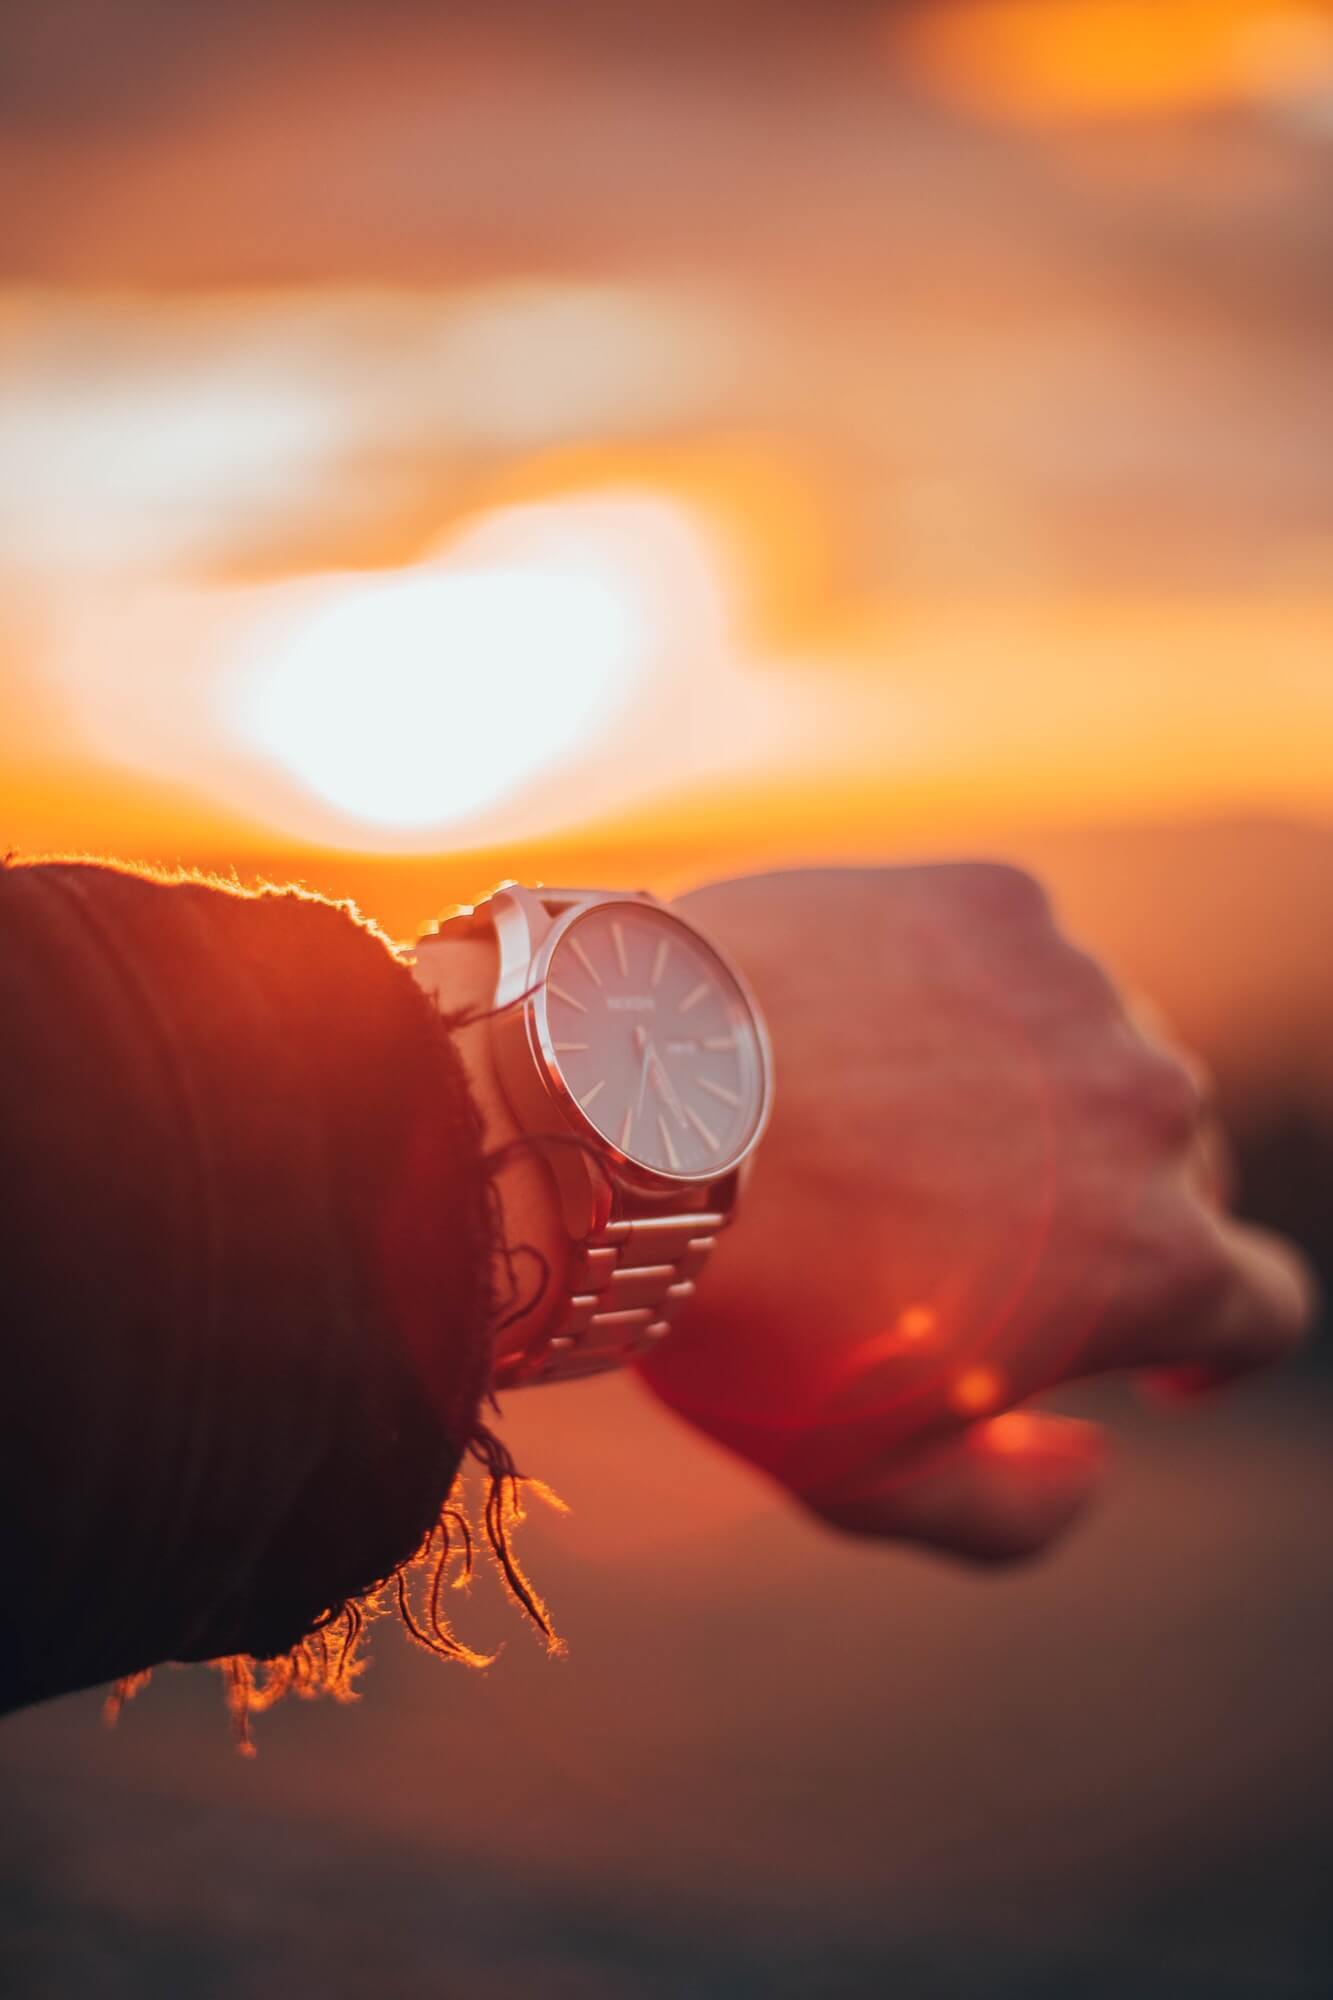 Nixon watch in the sunset